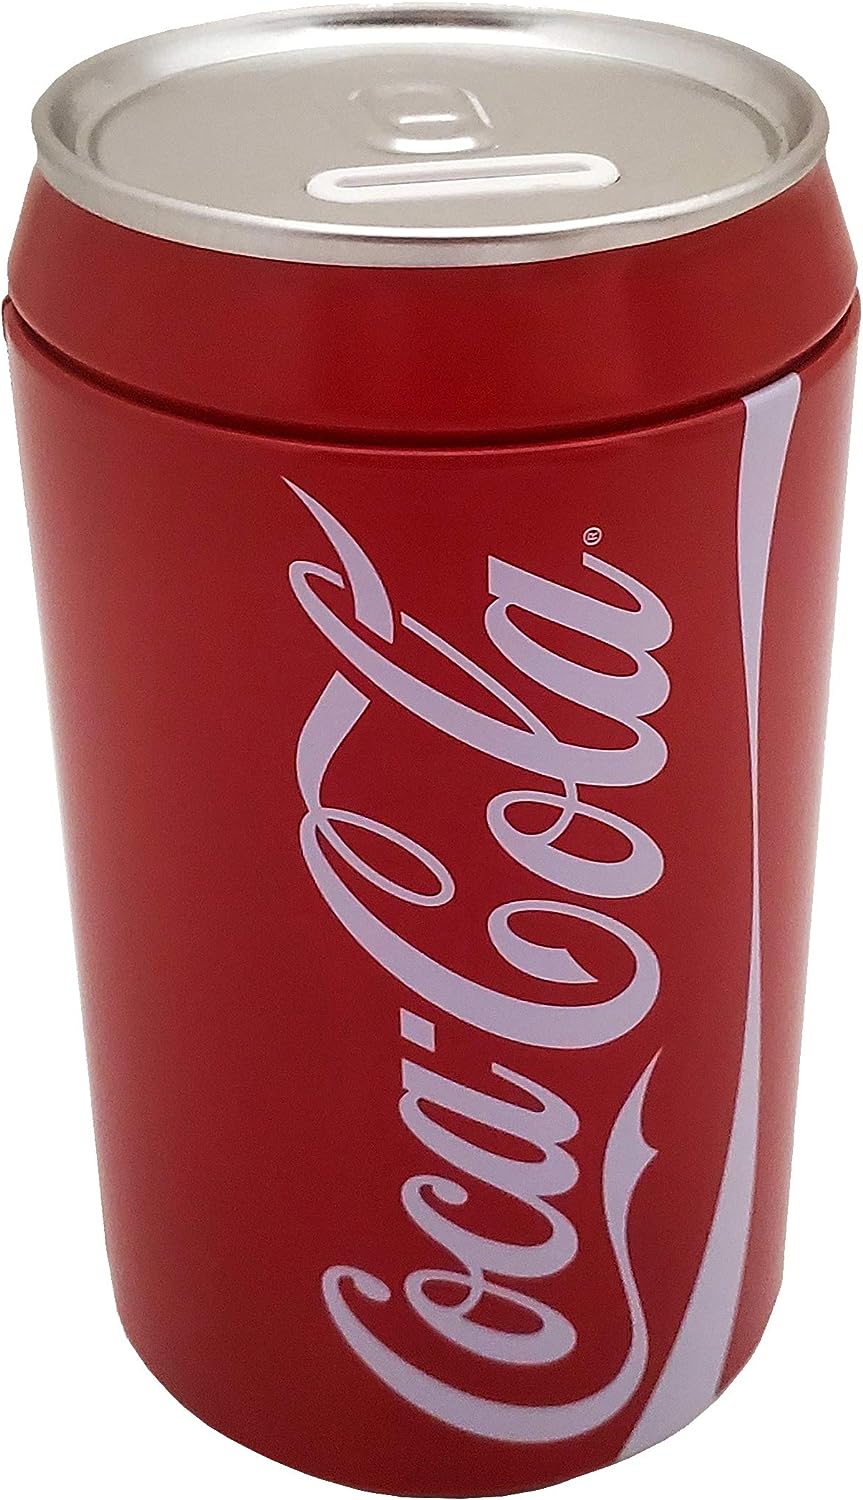 Coca Cola Can Bank with Removable Lid